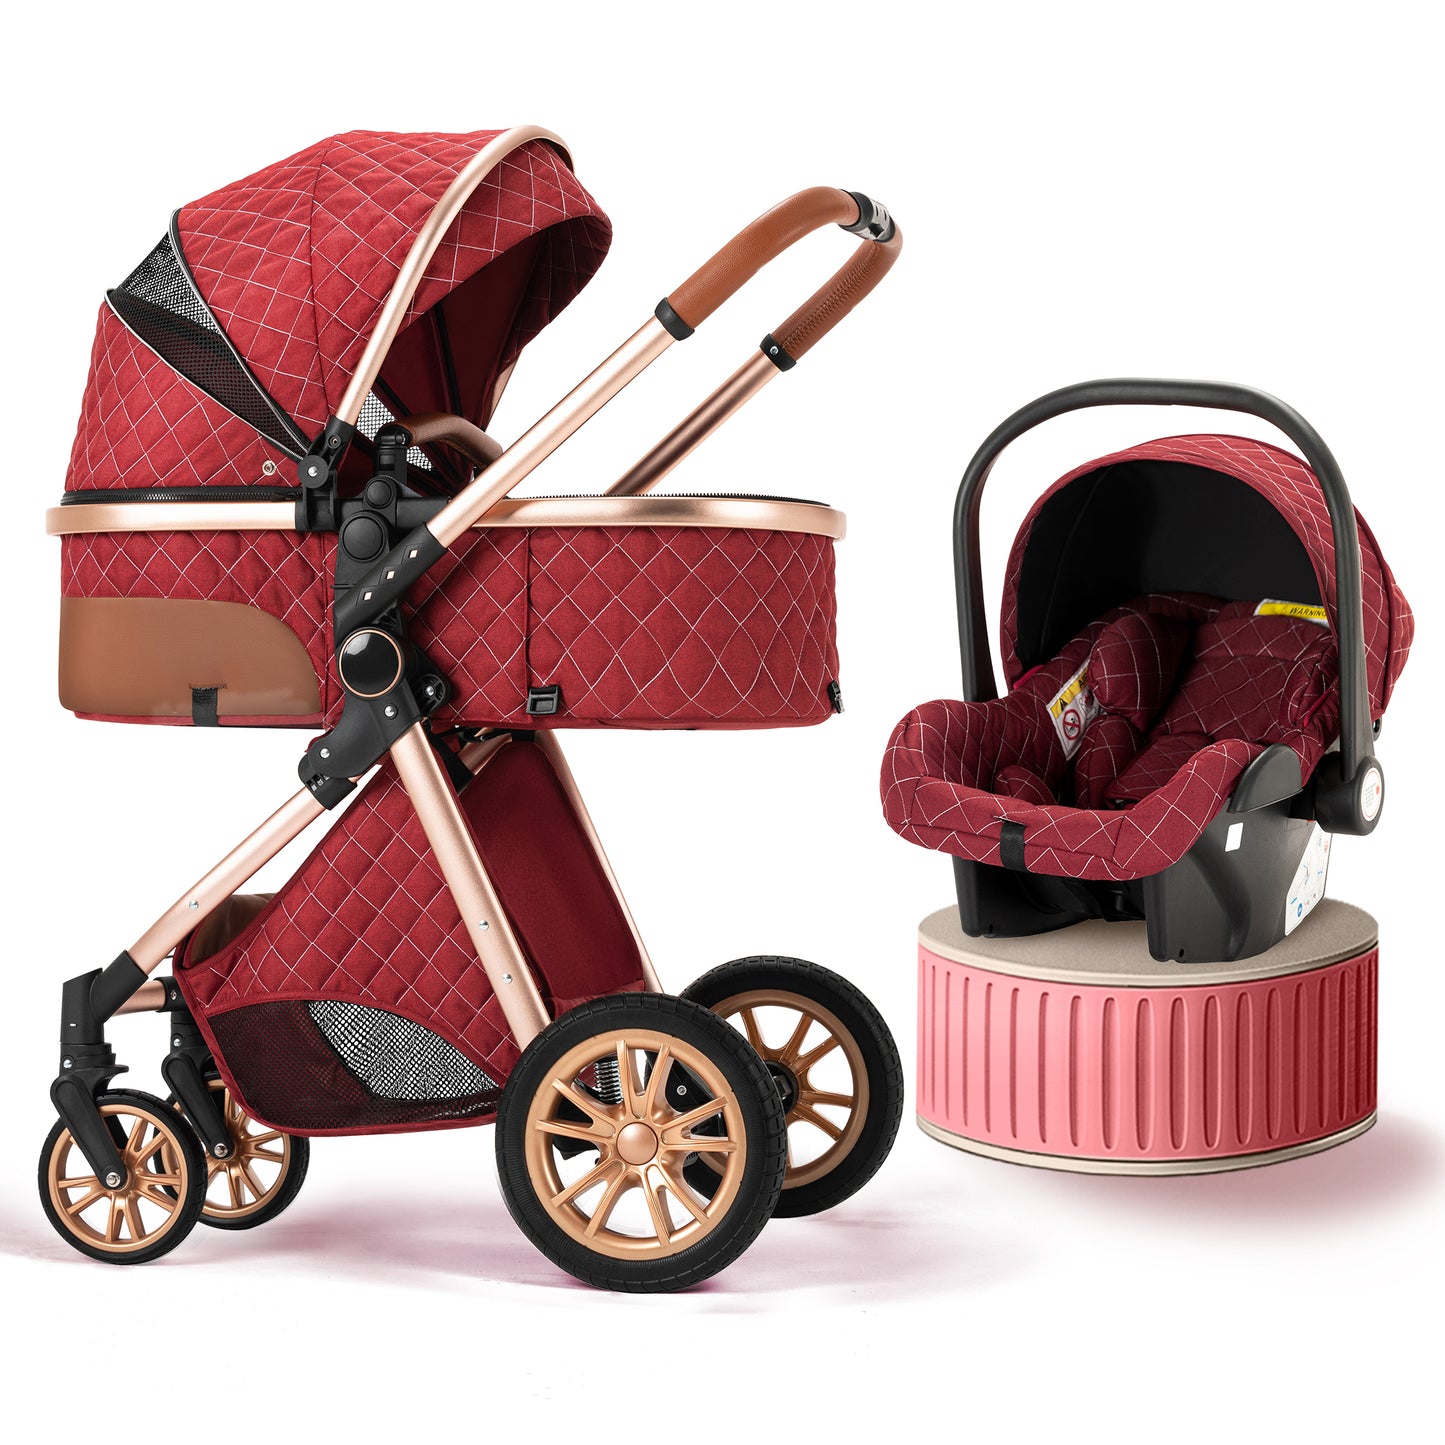 5-in-1 Premium Baby Stroller With Car Seat Carrier